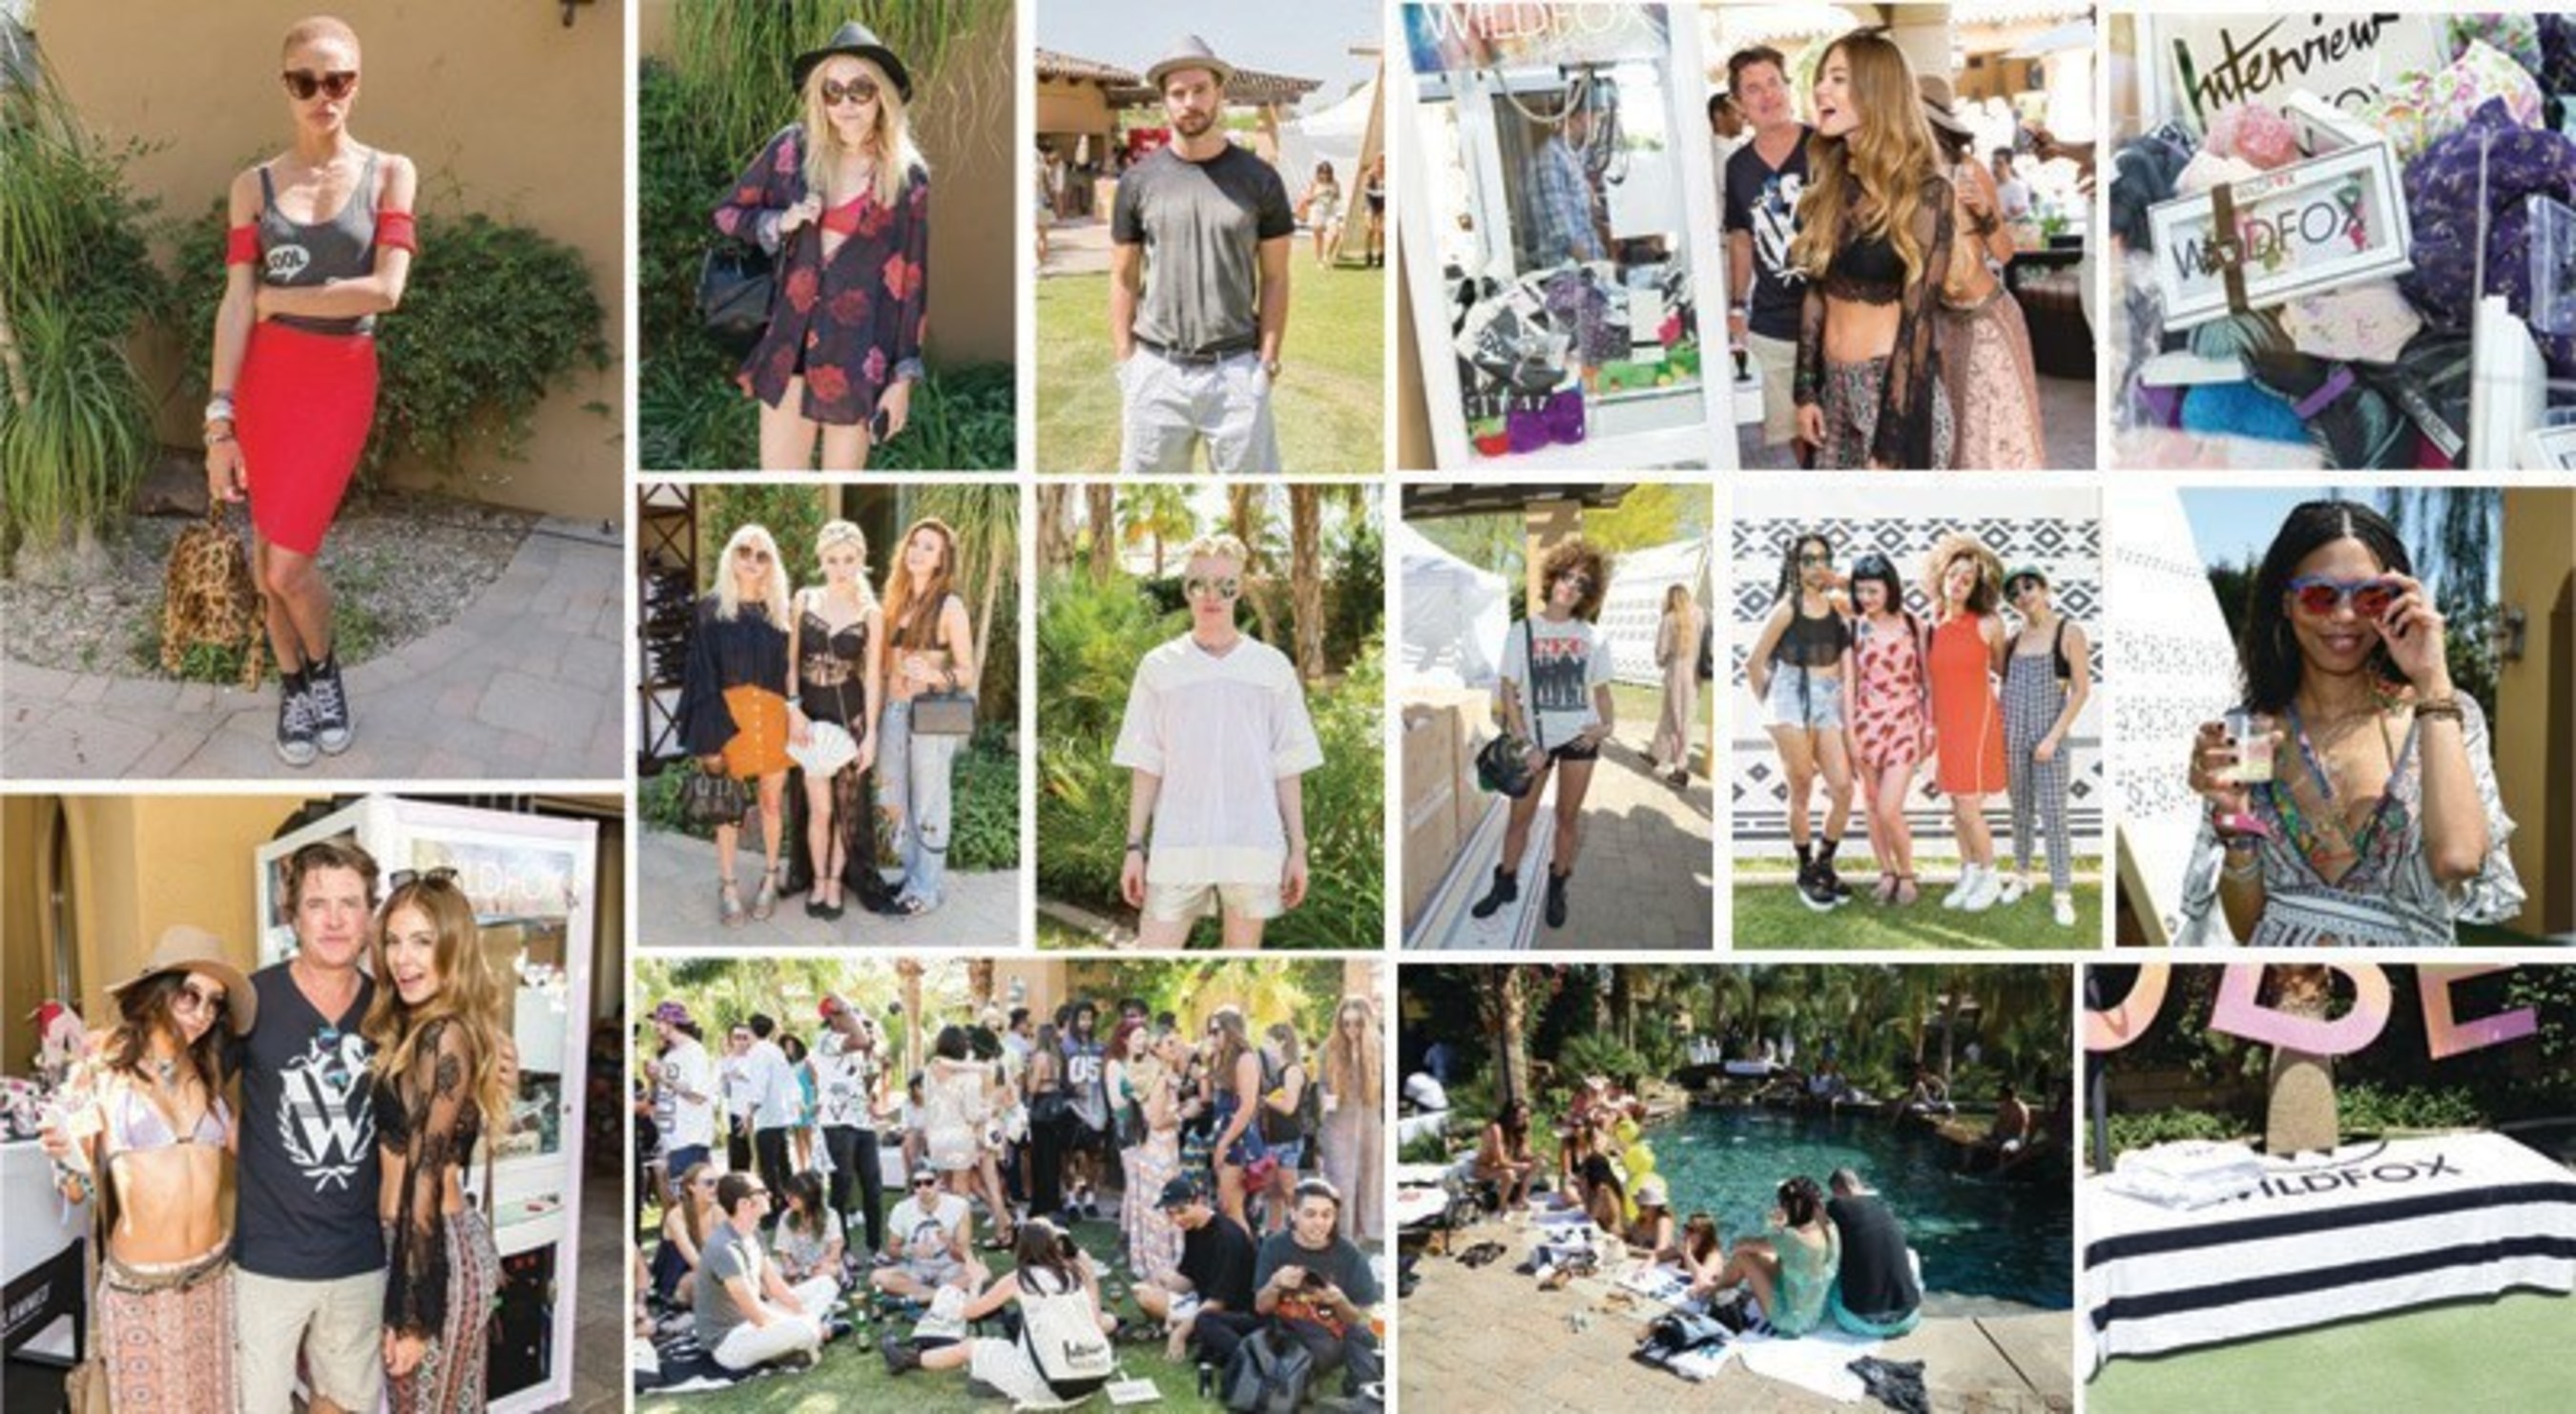 Overview: Wildfox x Interview Pool Party during Coachella Weekend One